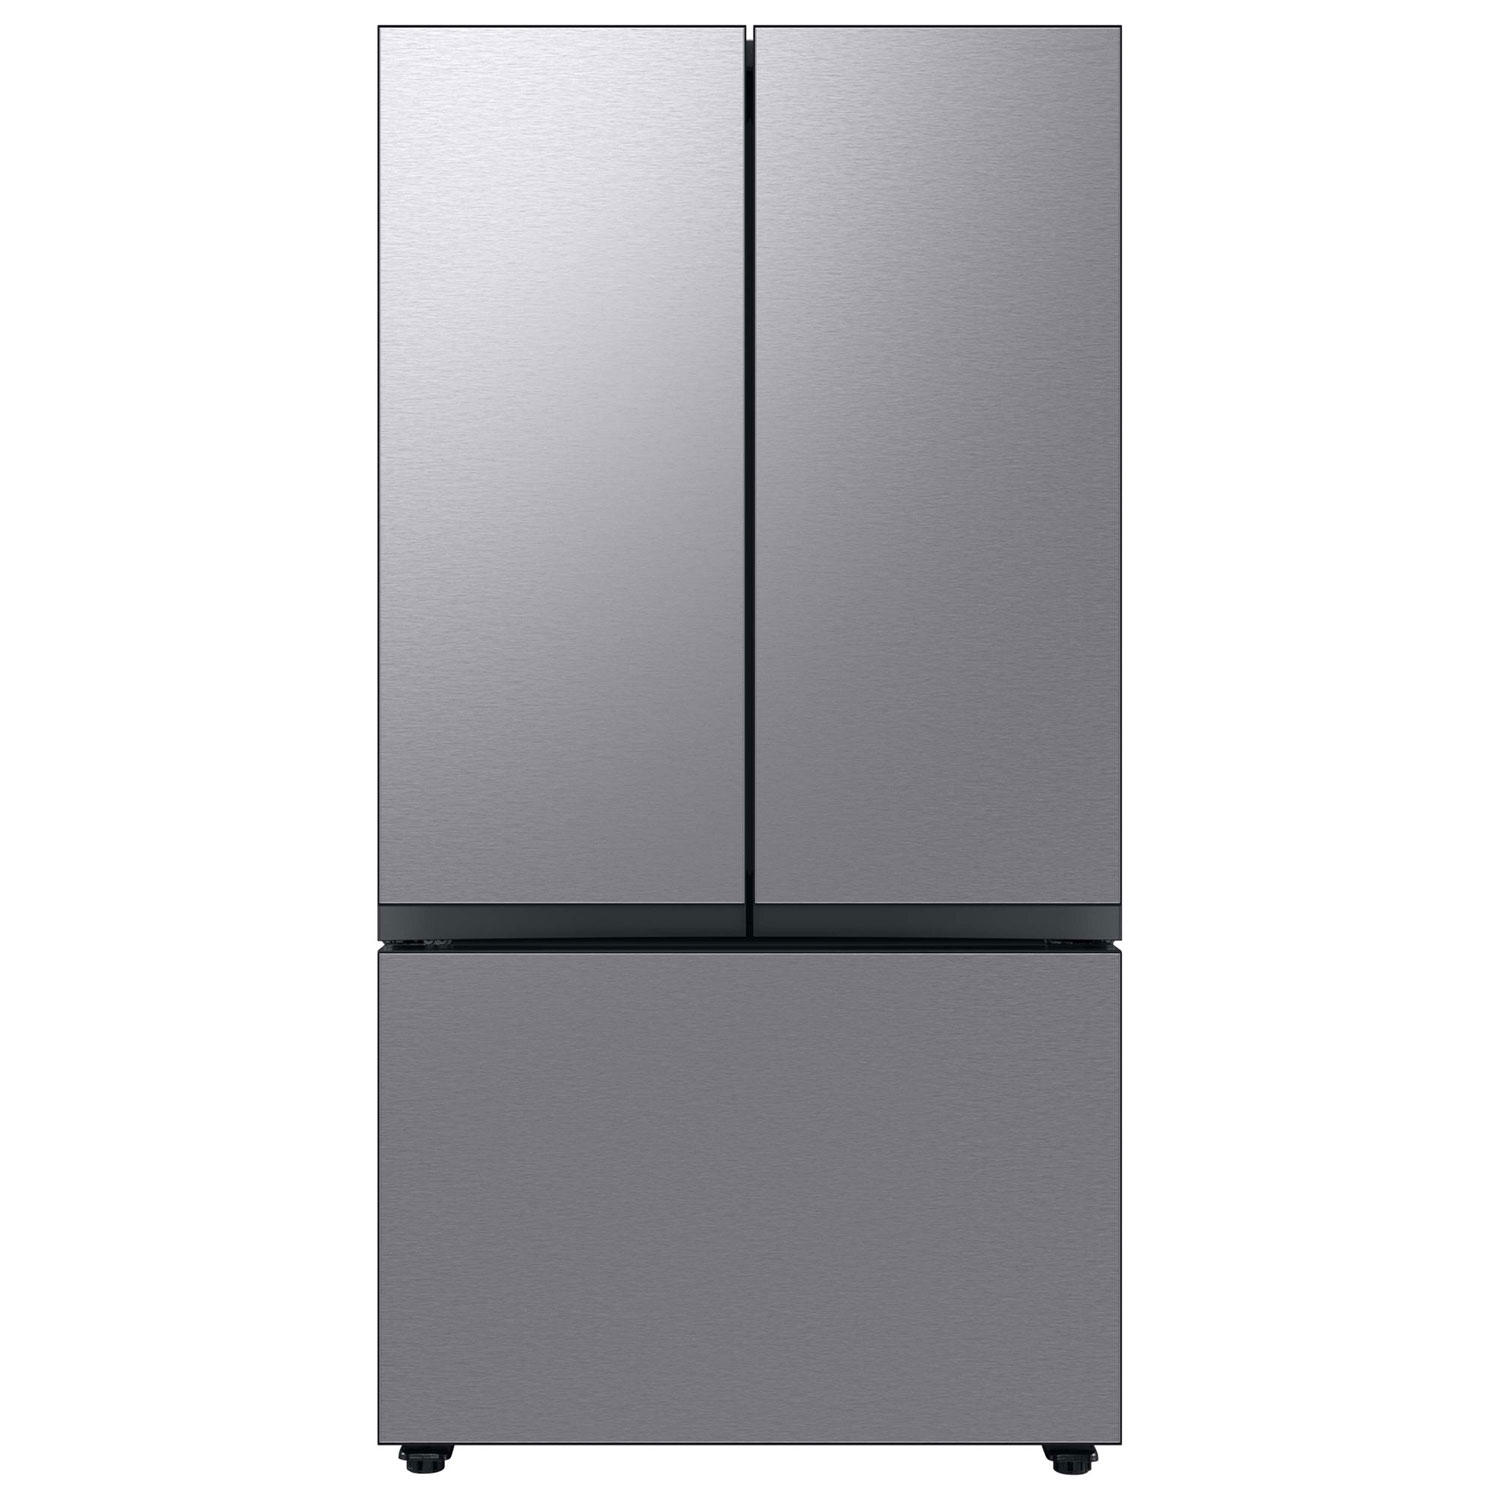 Samsung 30 cu. ft. Smart BESPOKE 3-Door French-Door Refrigerator with Customizable Panel Colors and AutoFill Water Pitcher (Stainless Steel)